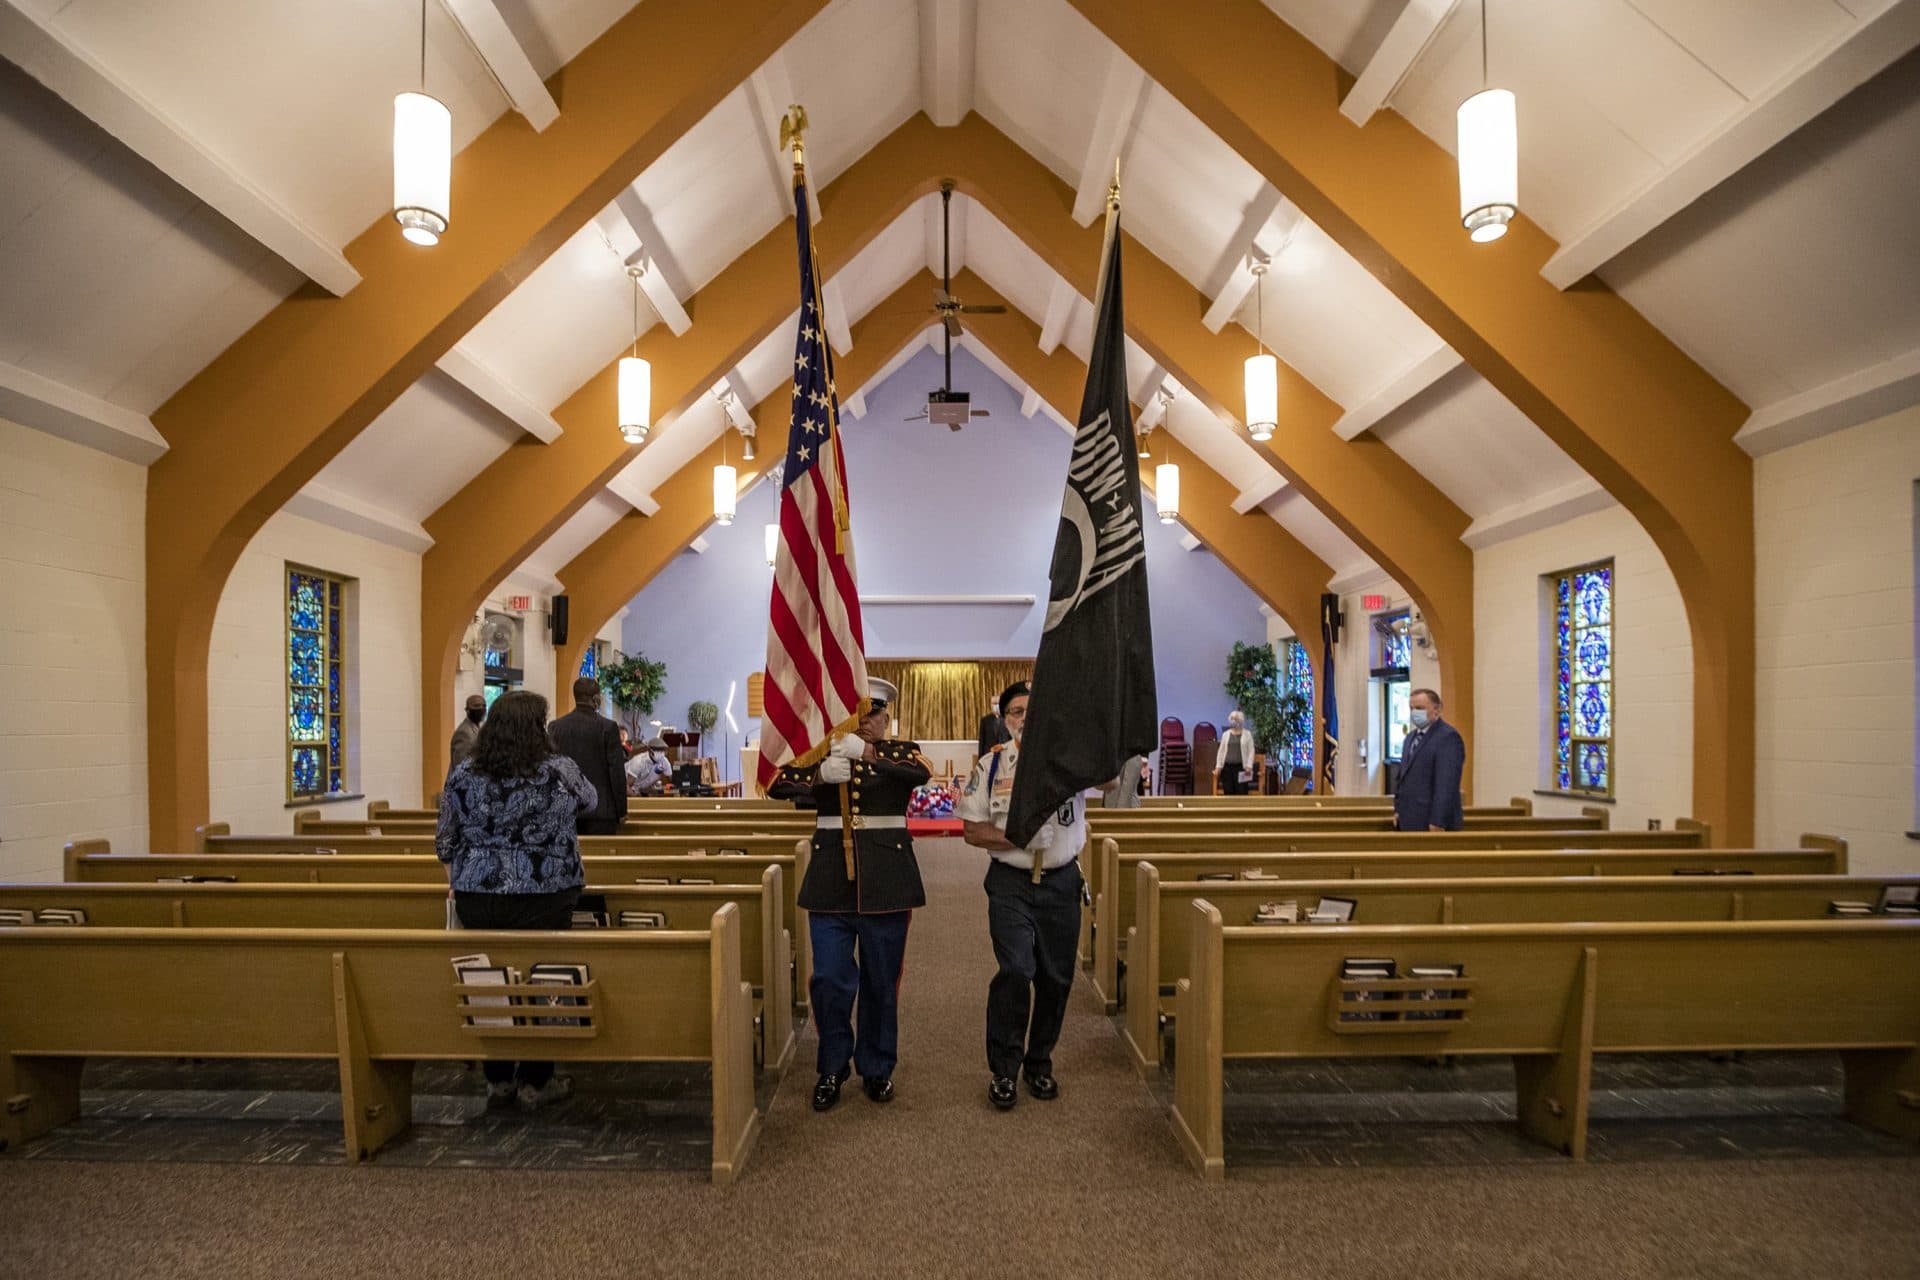 Thomas “Gunny” Estrada, left, and Jean Pinard perform the retirement of the colors to conclude the Memorial Day Interfaith Service at the Bedford VA Hospital chapel. (Jesse Costa/WBUR)